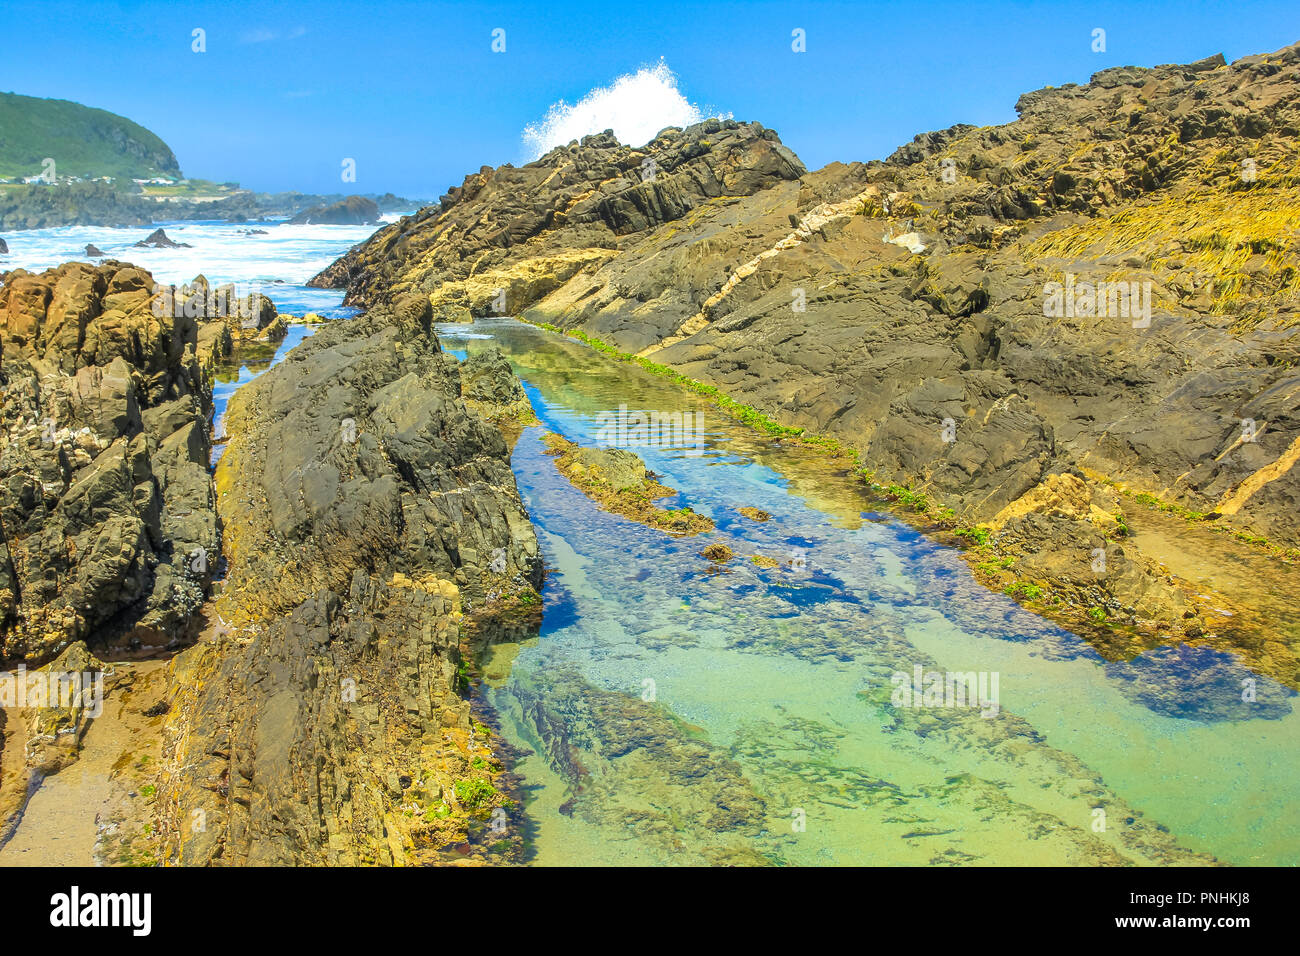 Rocks, tide pools and crashing waves in Tsitsikamma Nature Reserve on Garden Route in South Africa. The natural pools of the Storms River are a popular attraction in the Eastern Cape.Blu sky in summer Stock Photo